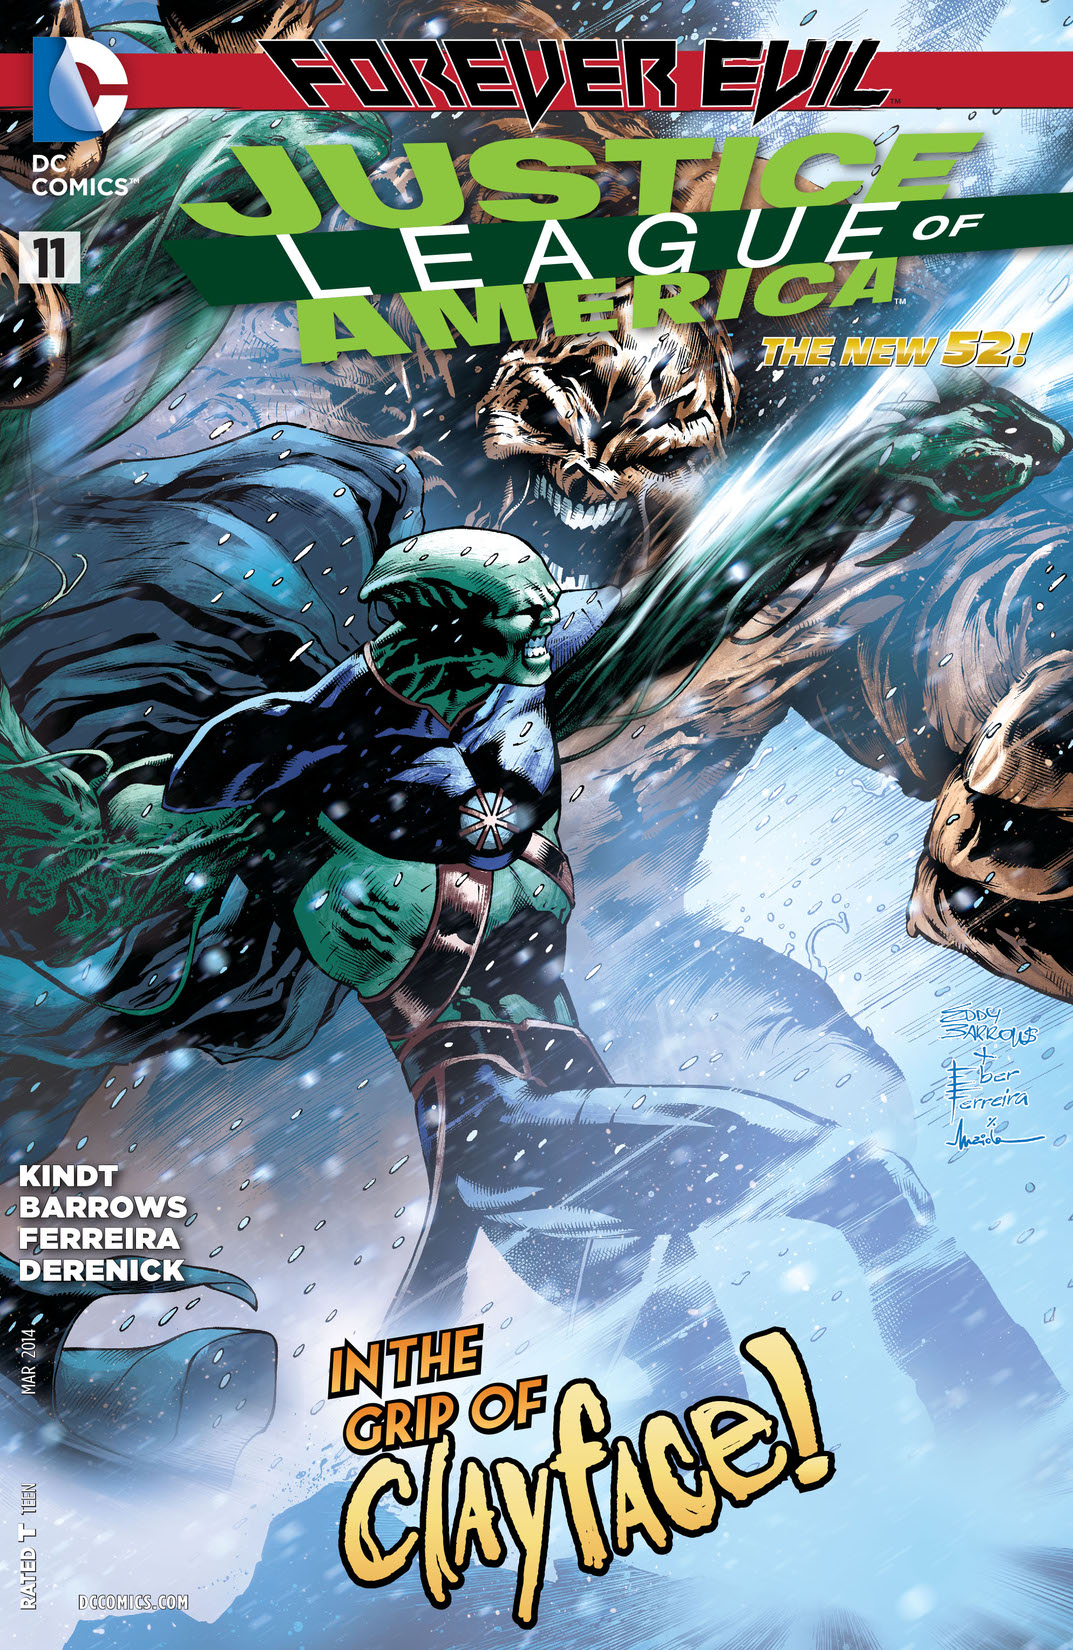 Justice League of America (2013-) #11 preview images